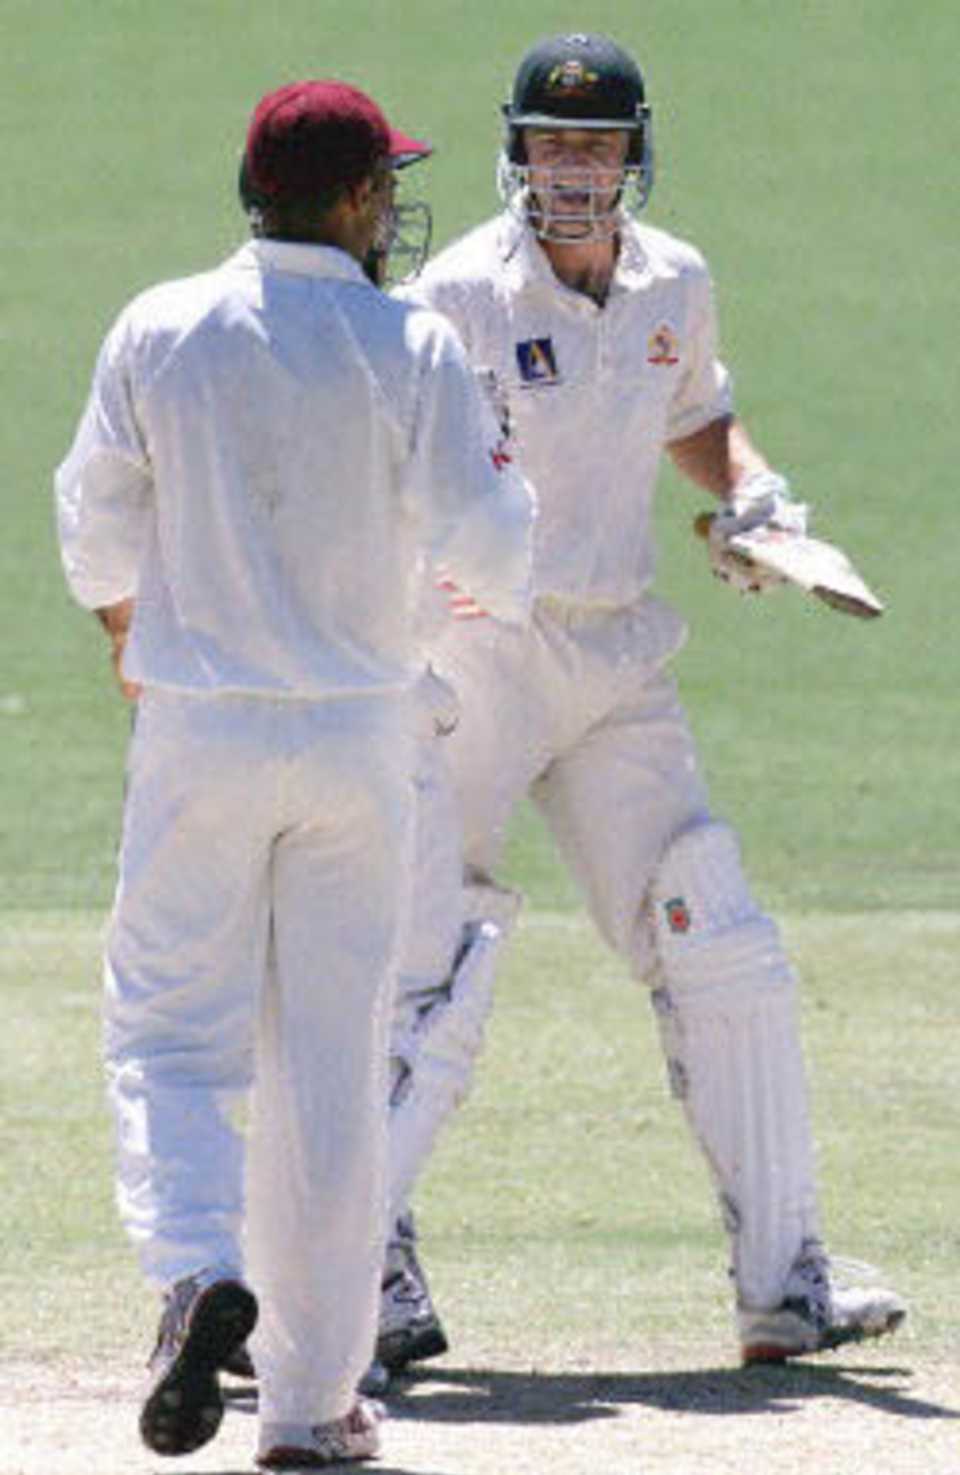 Gilchrist being congratulated by his counterpart Jimmy Adams